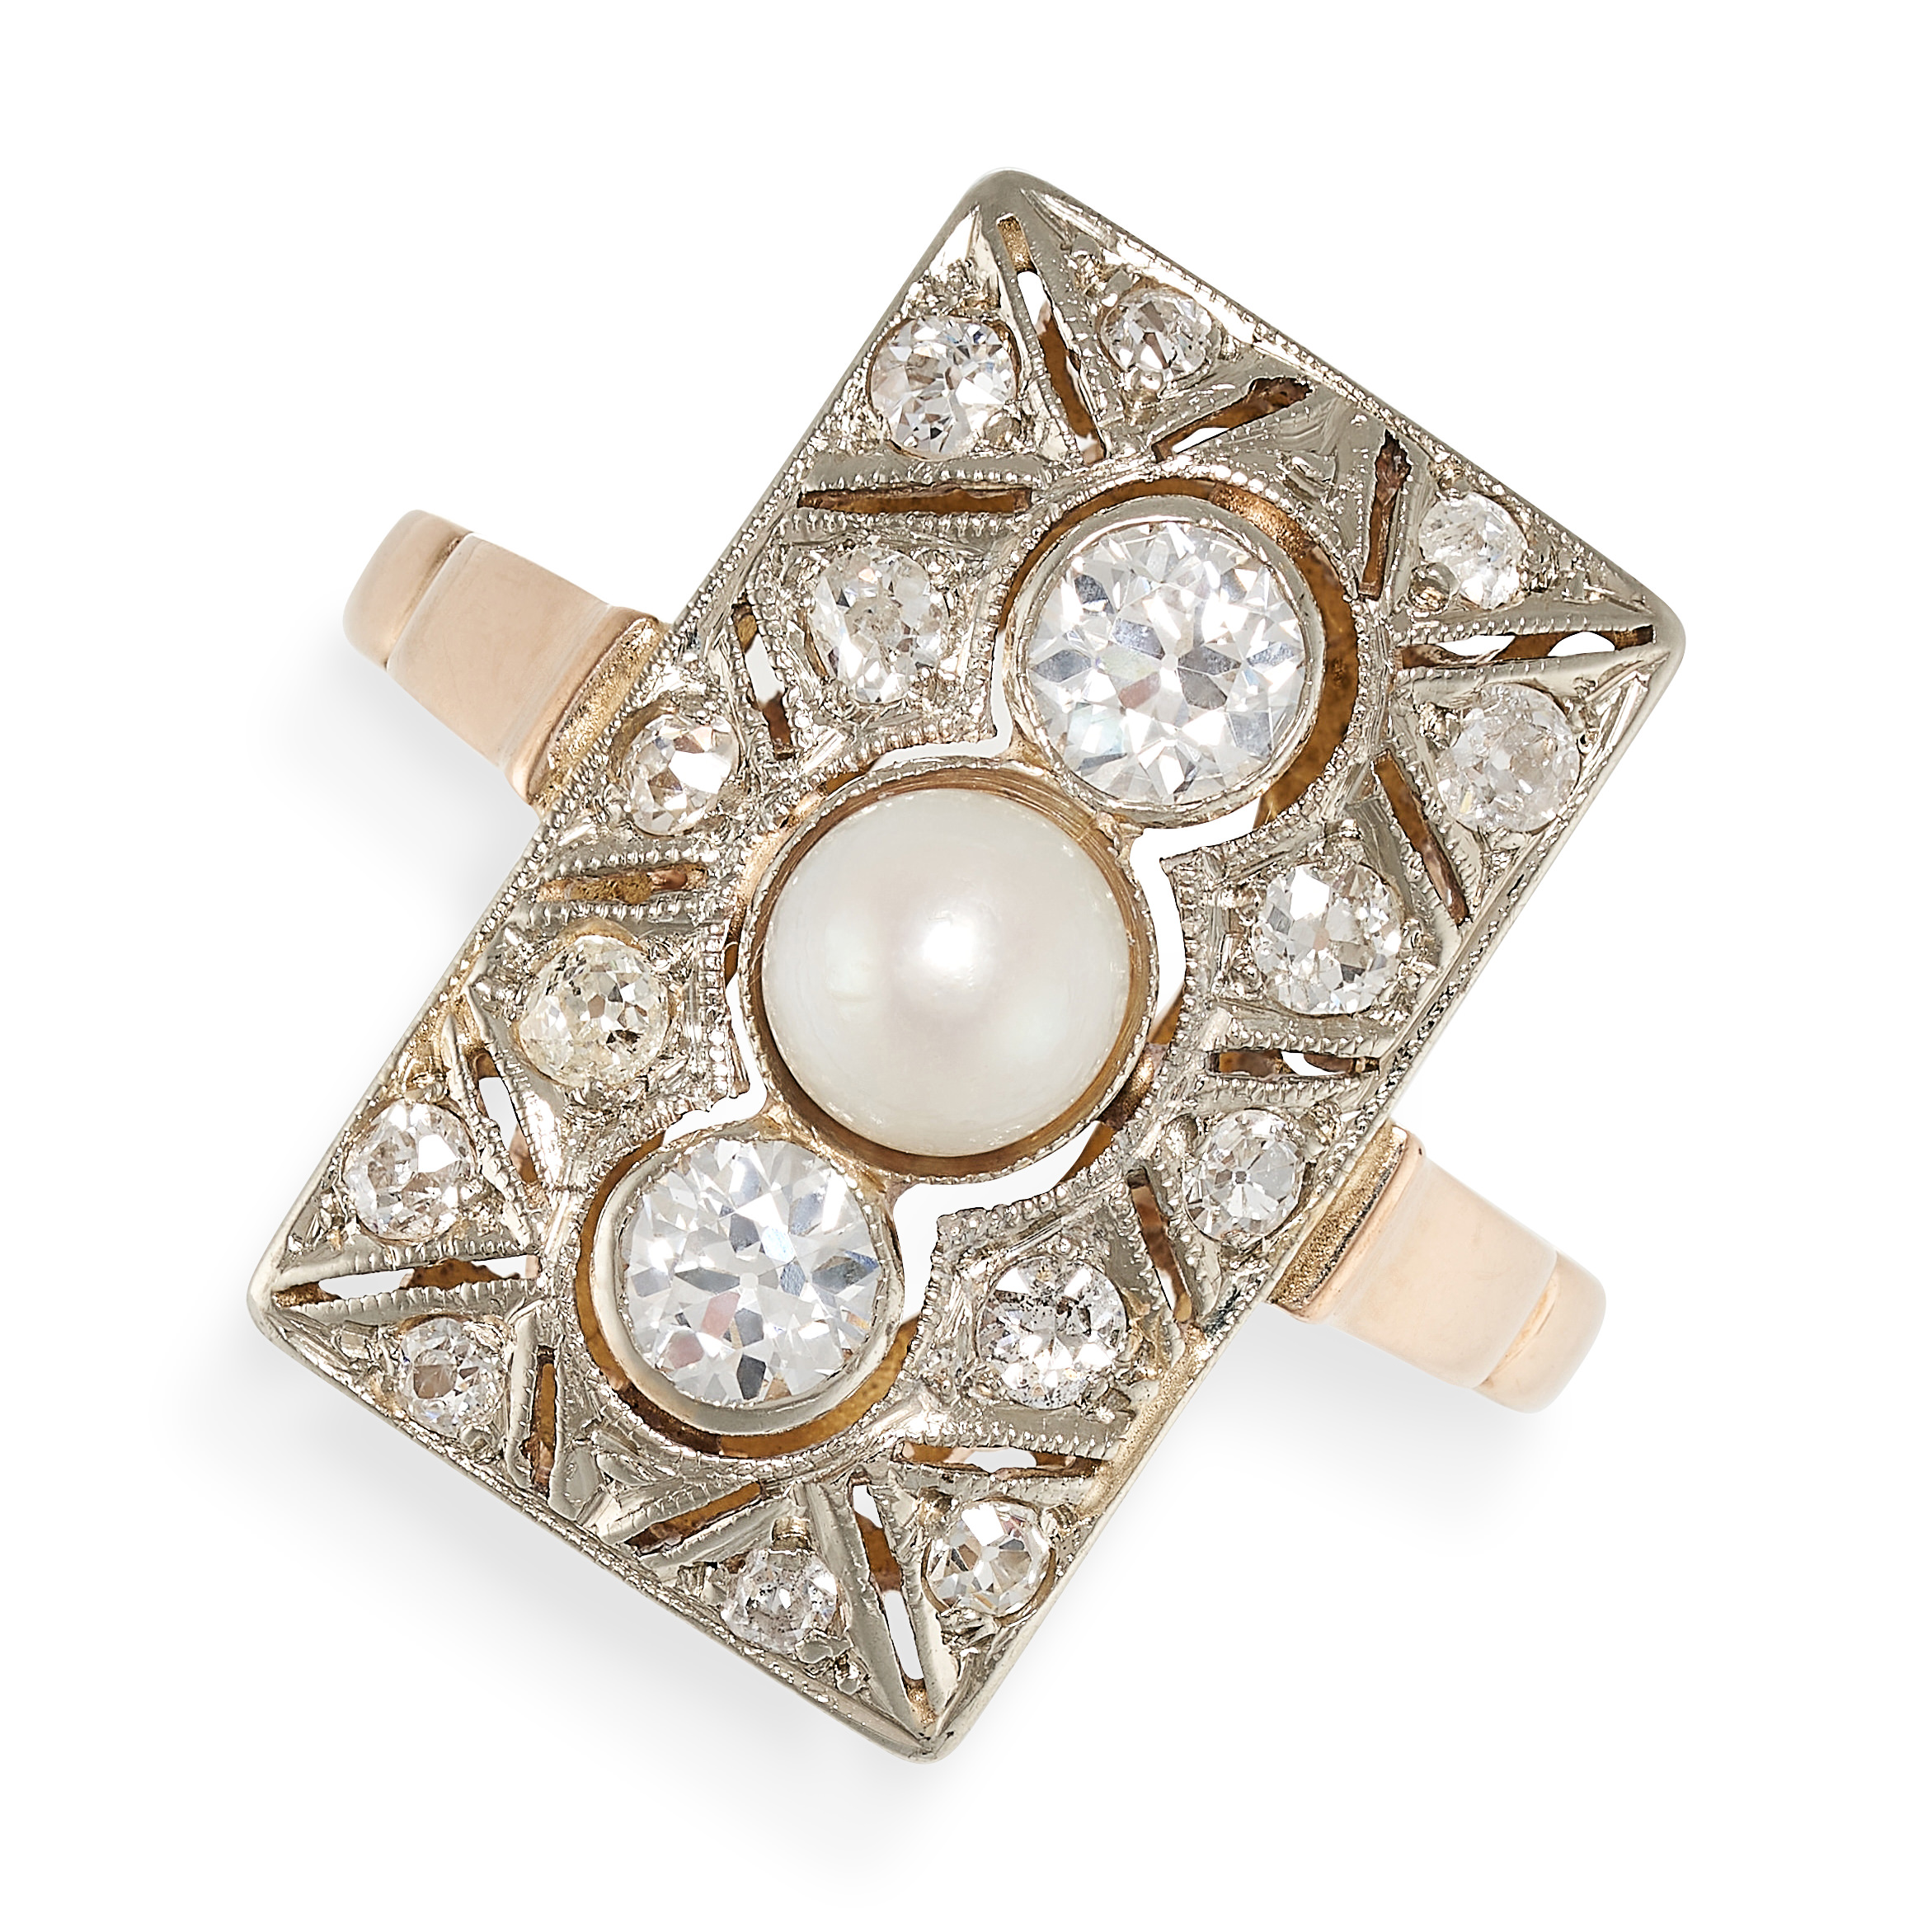 A PEARL AND DIAMOND RING in 14ct yellow gold and white gold, the rectangular face set with a central